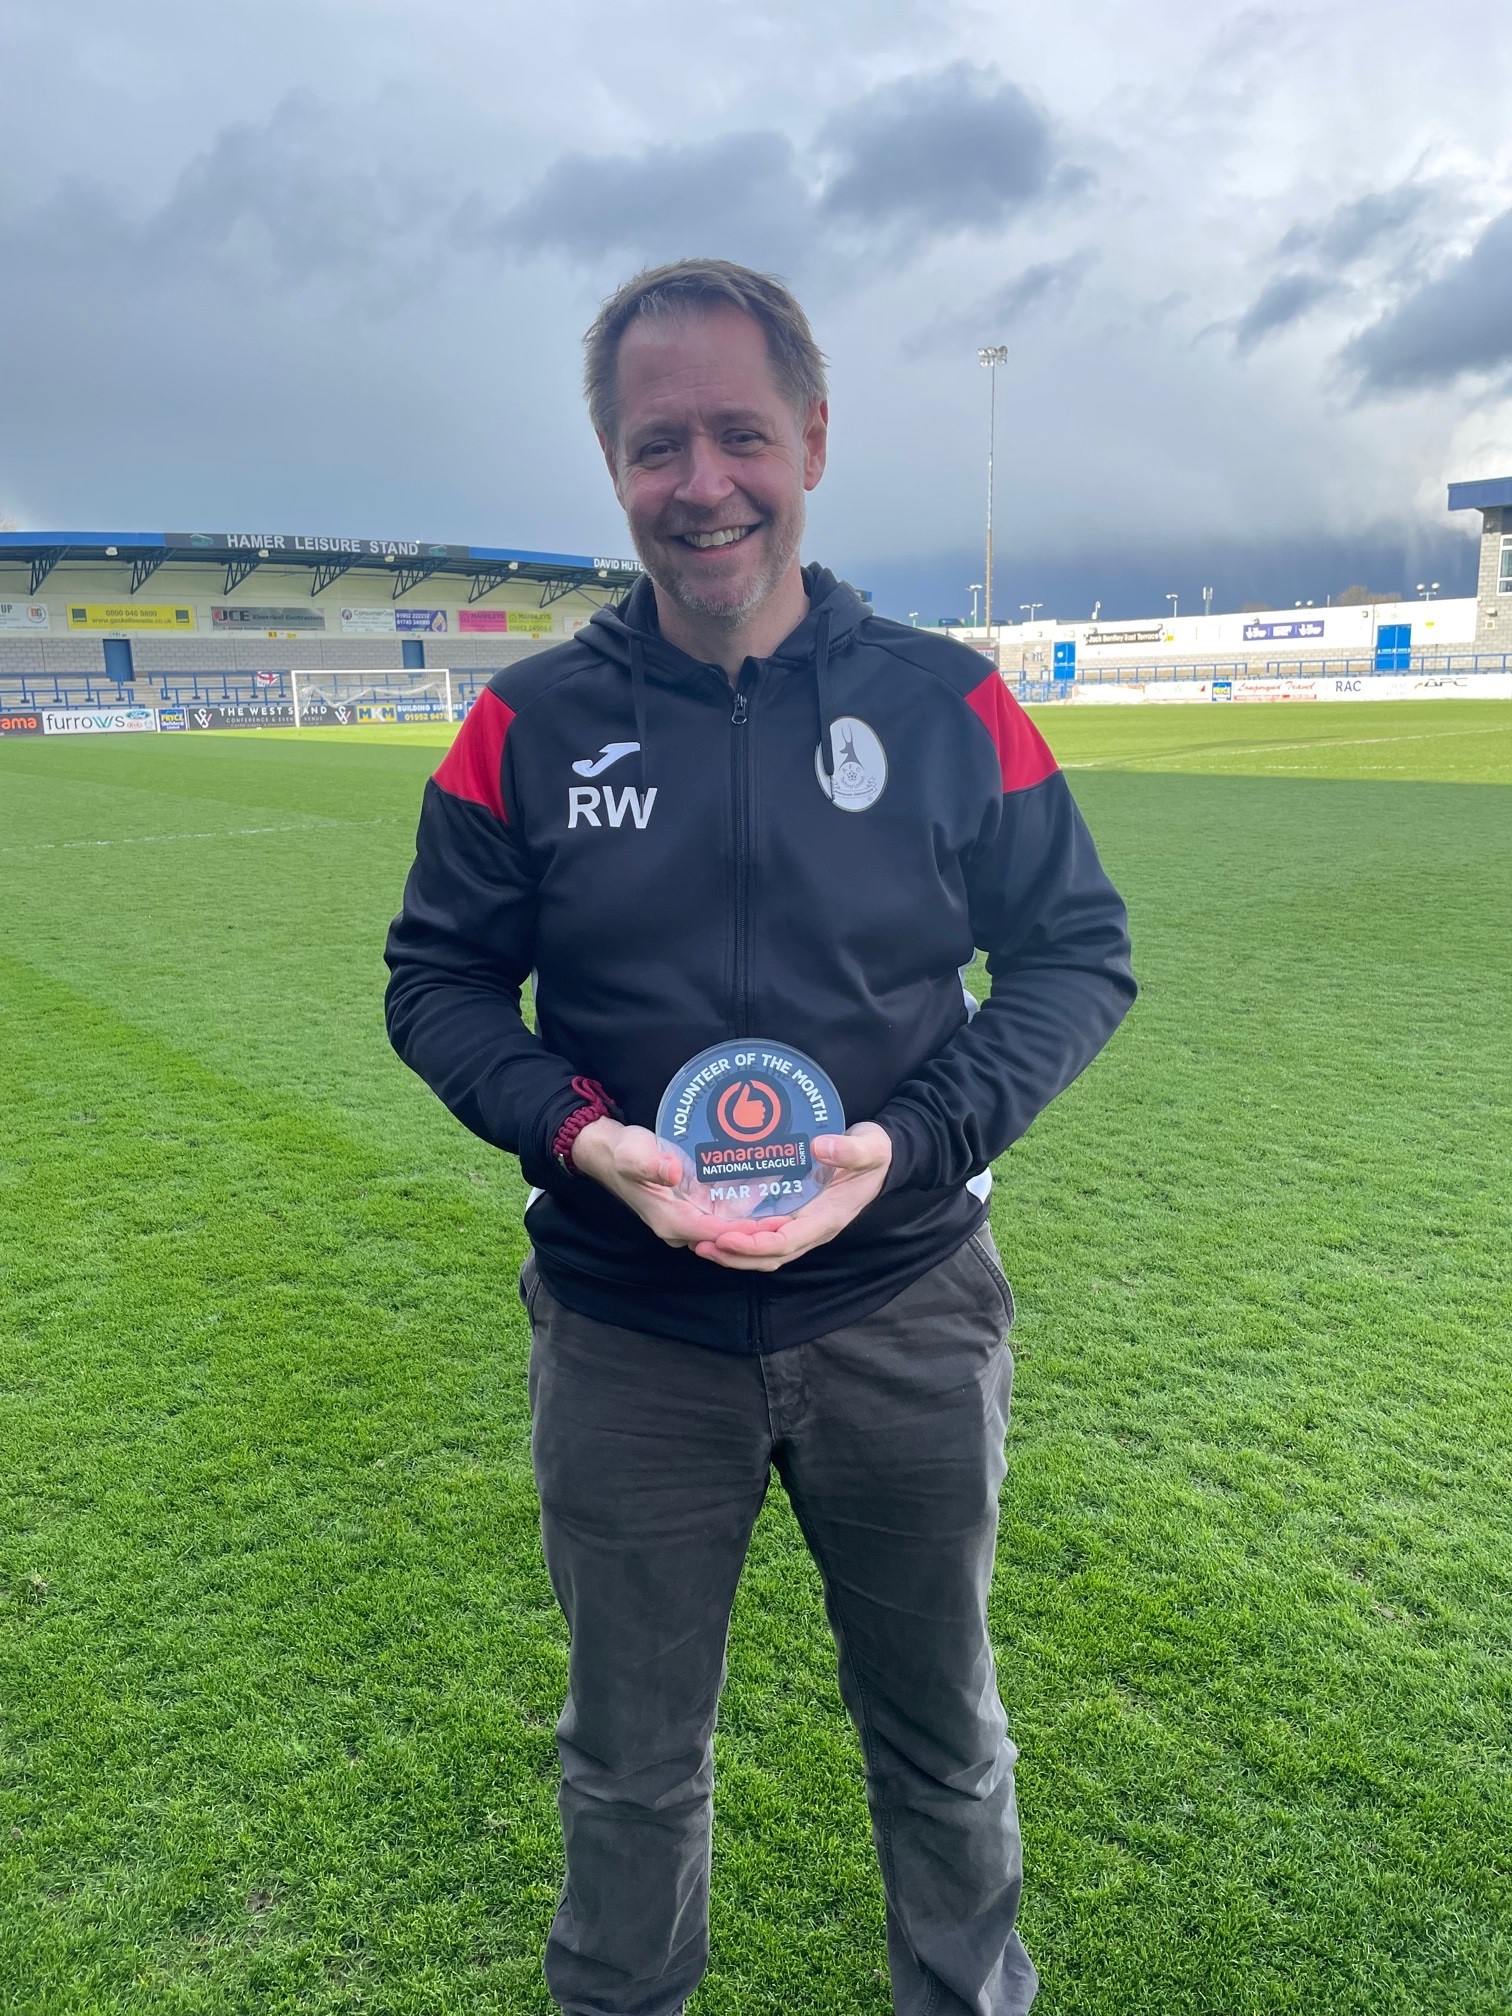 Richard Worton: National League North Volunteer Of The Month